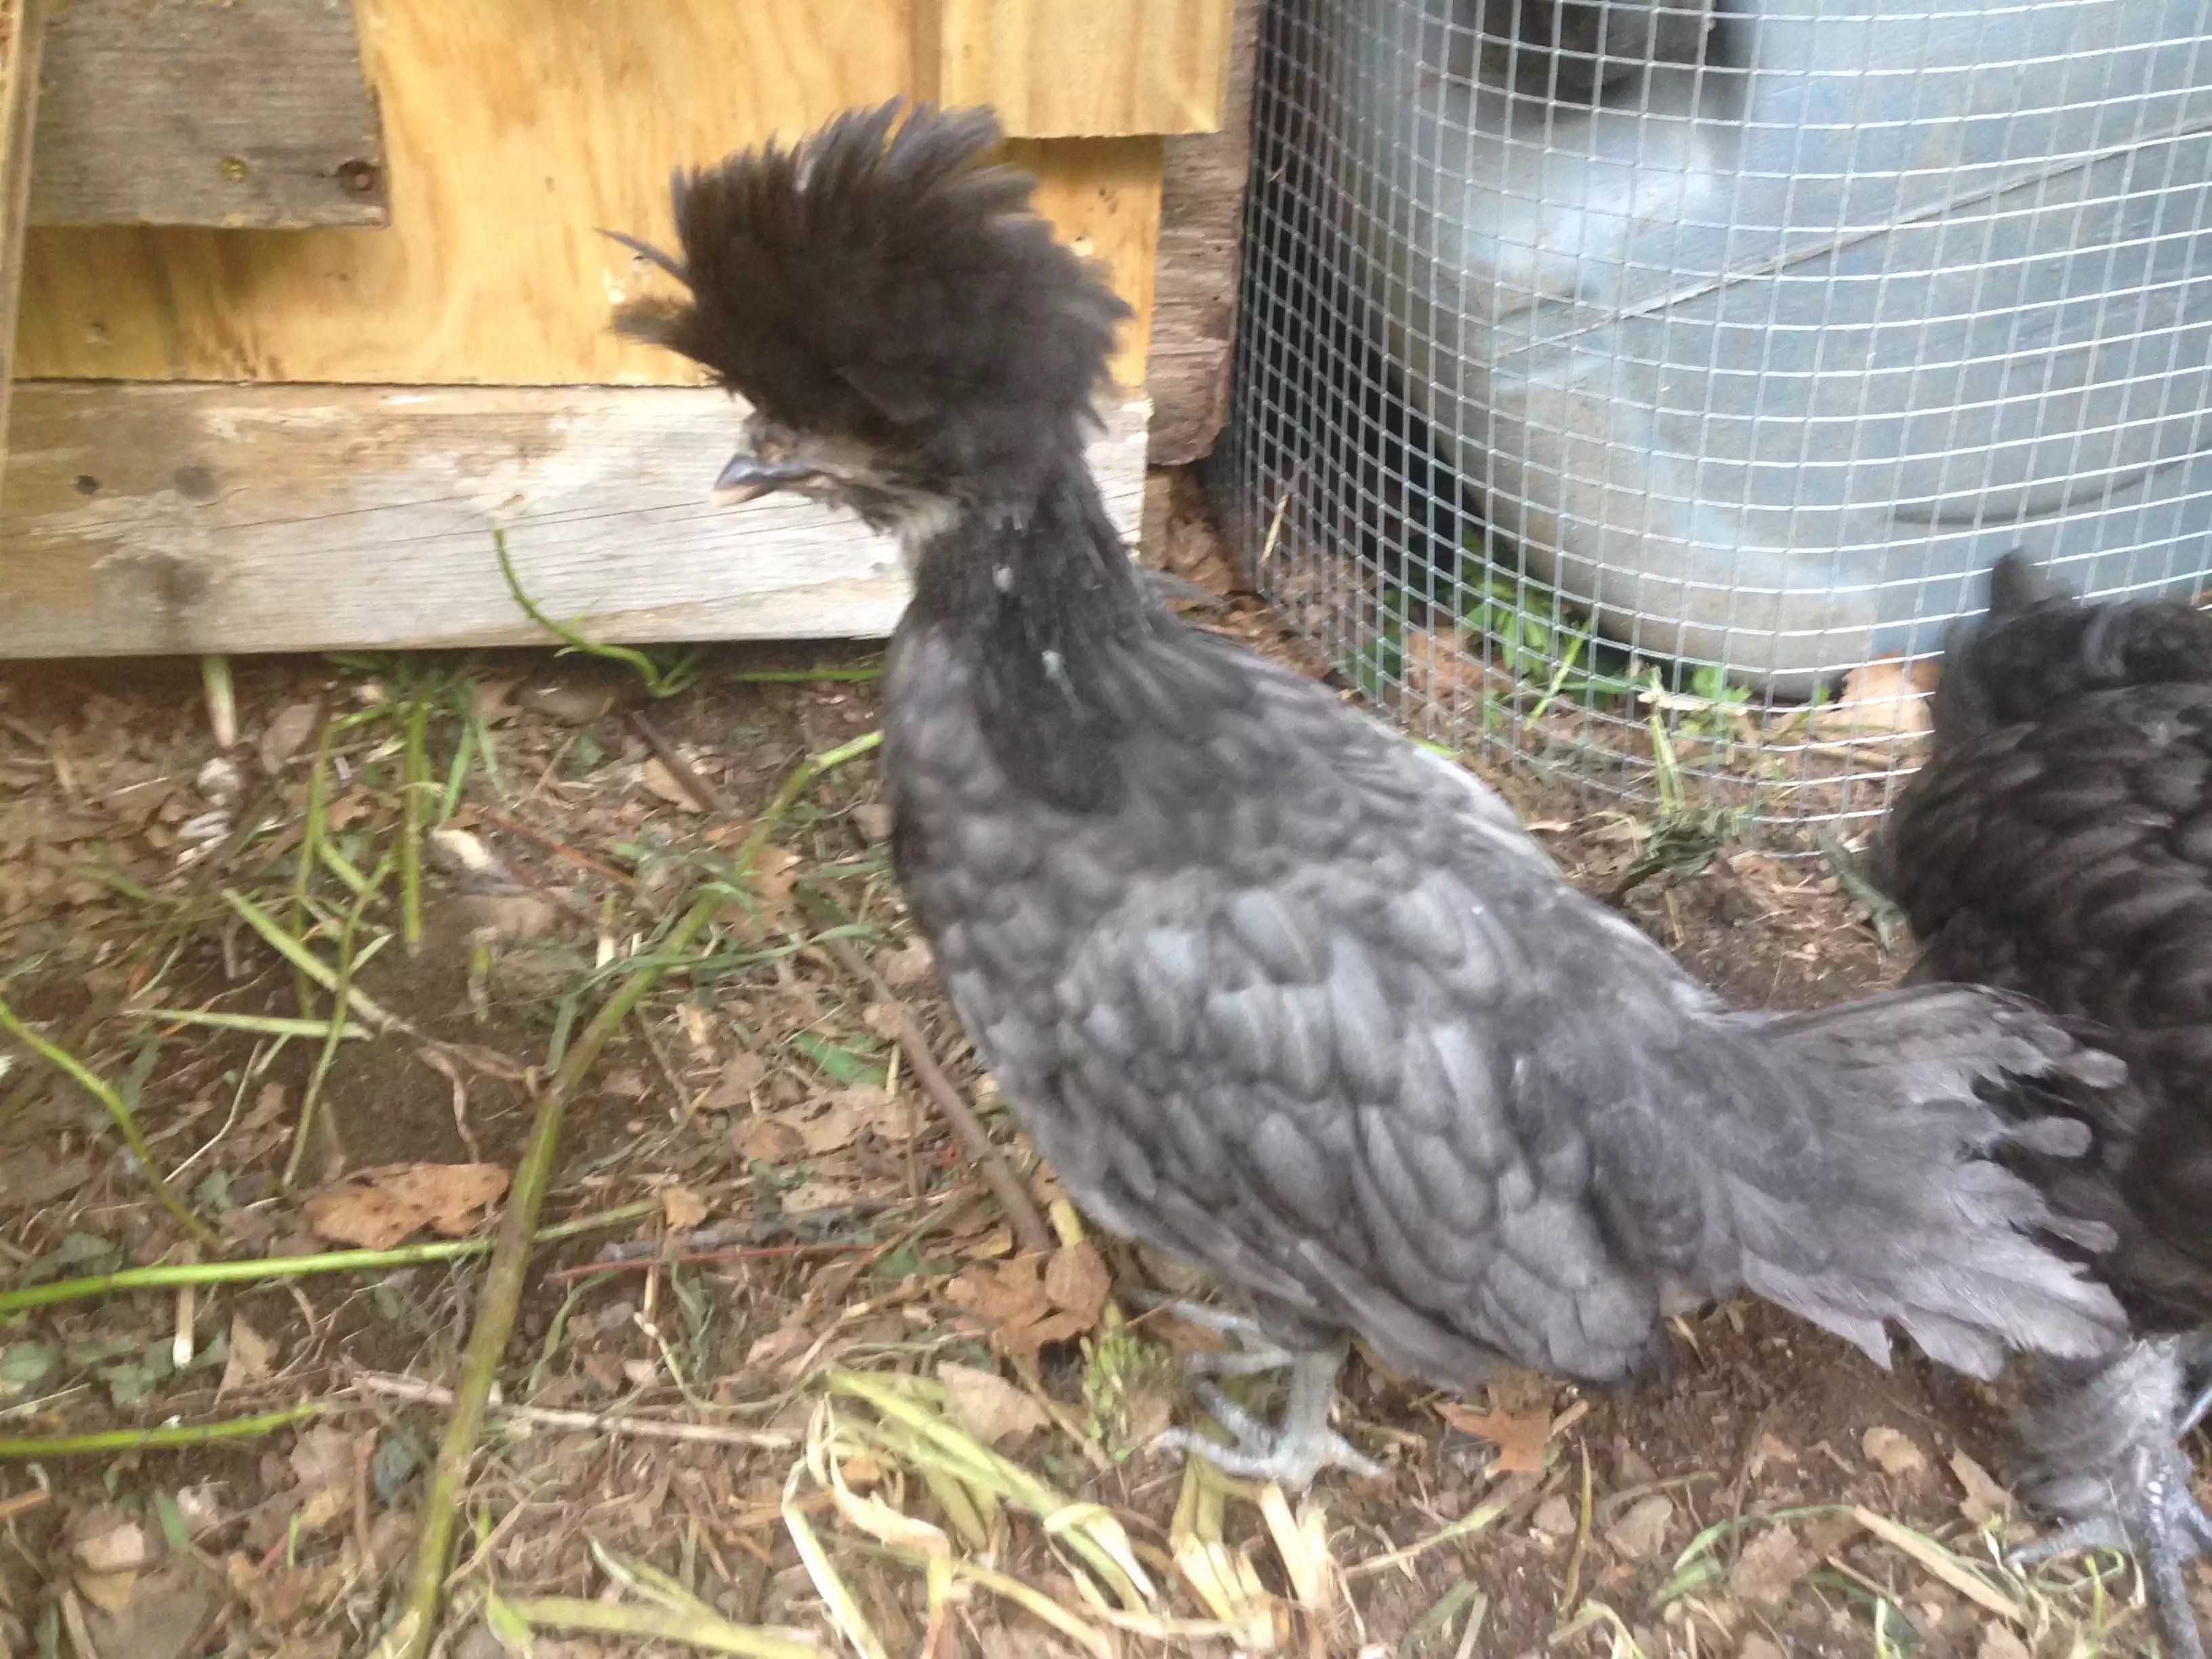 Puff - I'm pretty sure this one is full Polish Crested since s/he has 4 toes and light colored skin and this AMAZING crest.